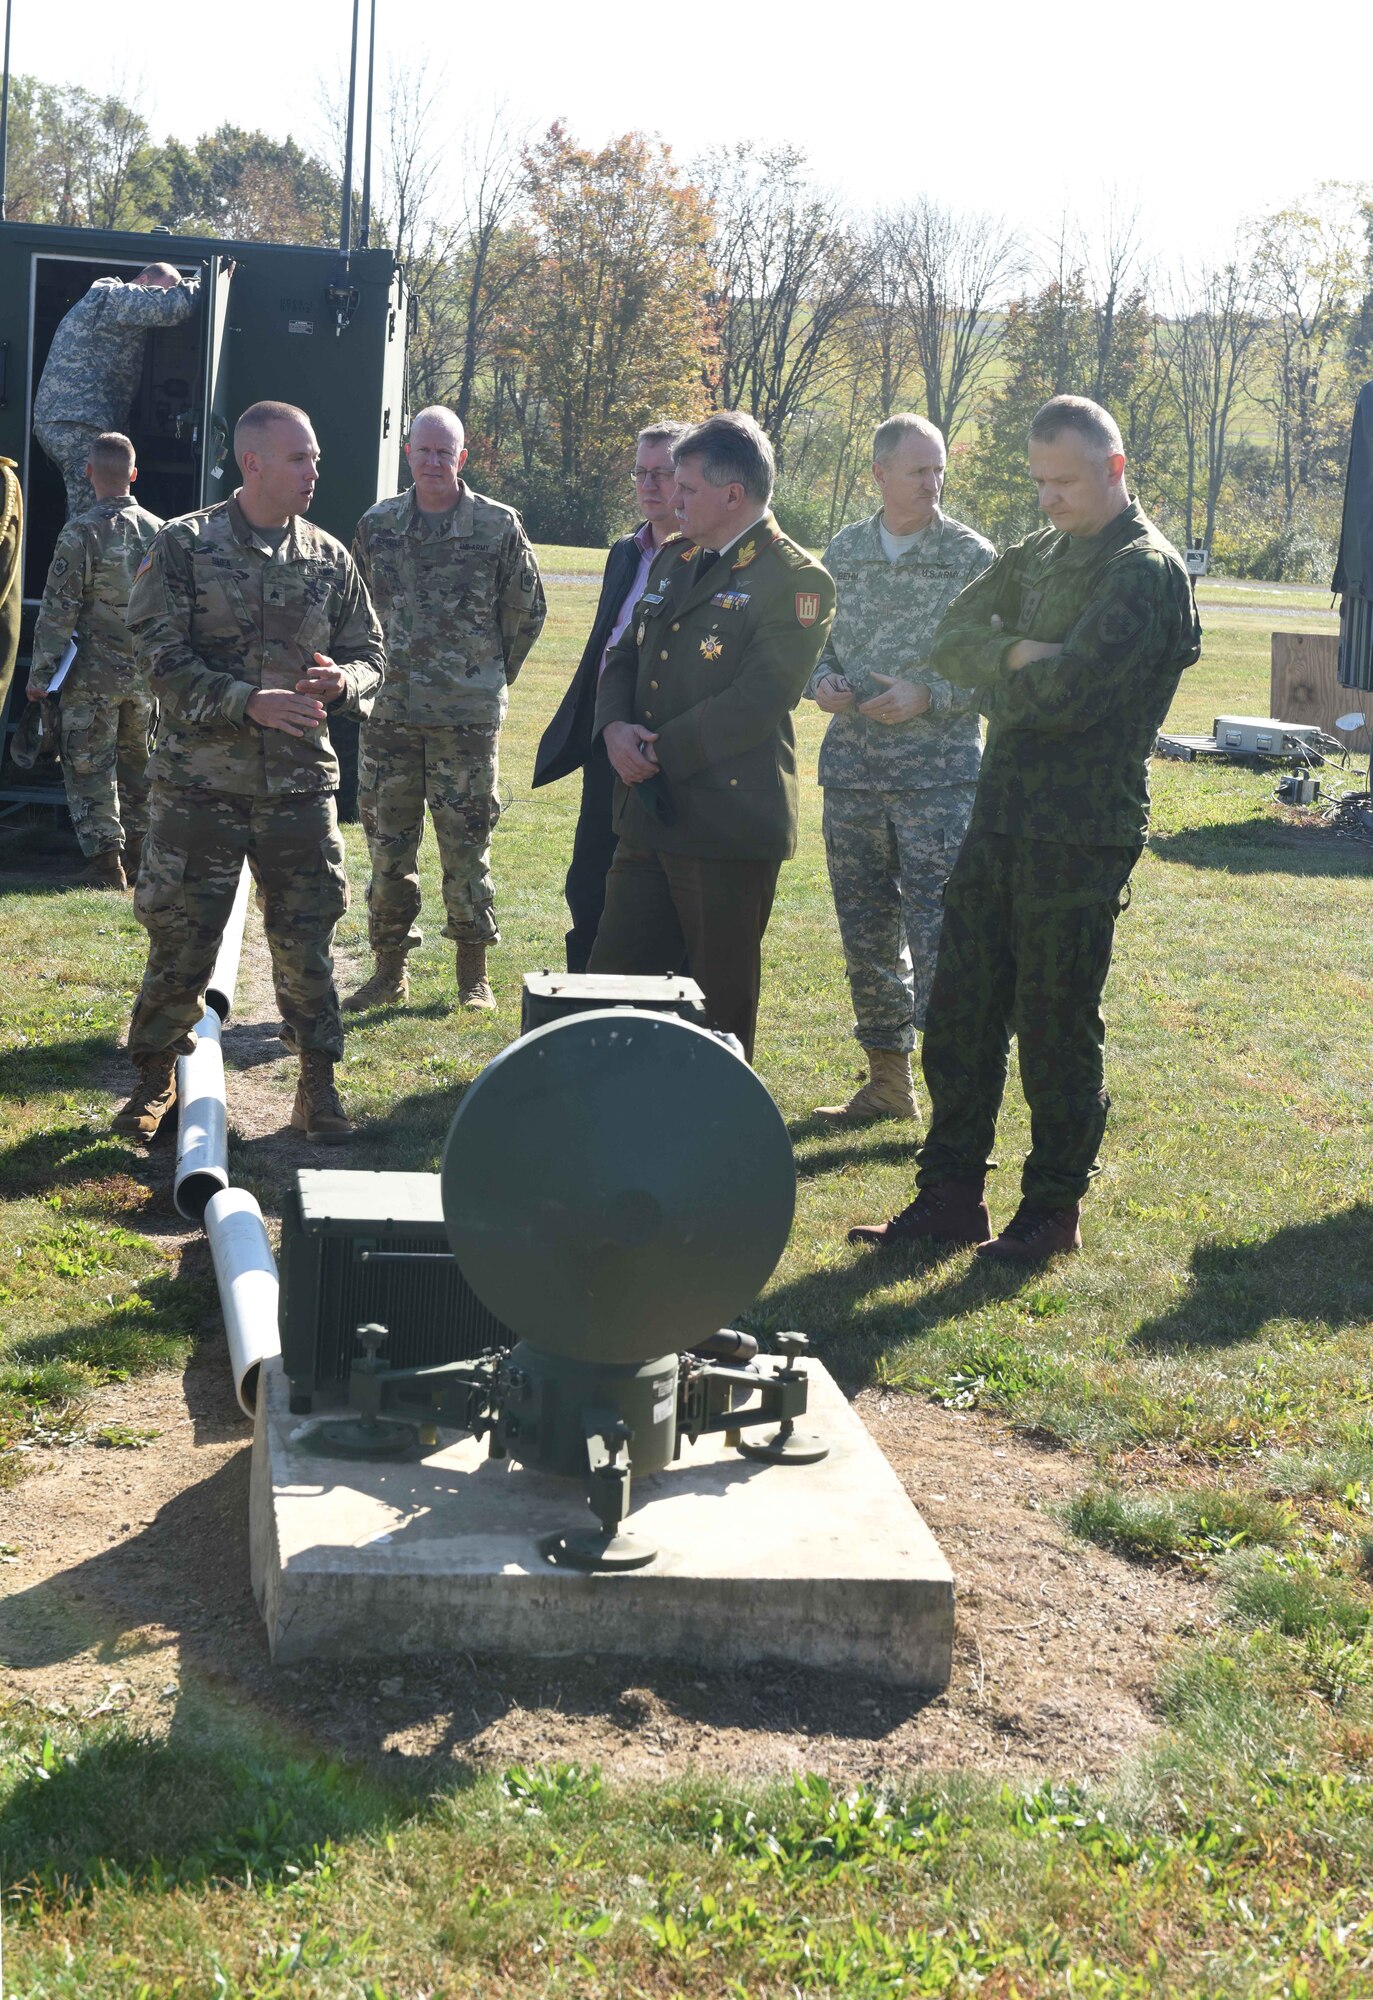 Soldiers of the Pennsylvania Army National Guard’s unmanned aerial vehicle fleet explain its processes and functions to Lt. Gen. Jonas Vytautas Zukas (center), chief of defense of Lithuania, during a tour of the facilities Oct. 15 at Fort Indiantown Gap, Annville, Pa. Airmen and soldiers with the Pennsylvania National Guard spent the day with Lithuanian officials, fostering a state-country partnership that began in 1993. (U.S. Air National Guard photo by Tech. Sgt. Claire Behney/Released)